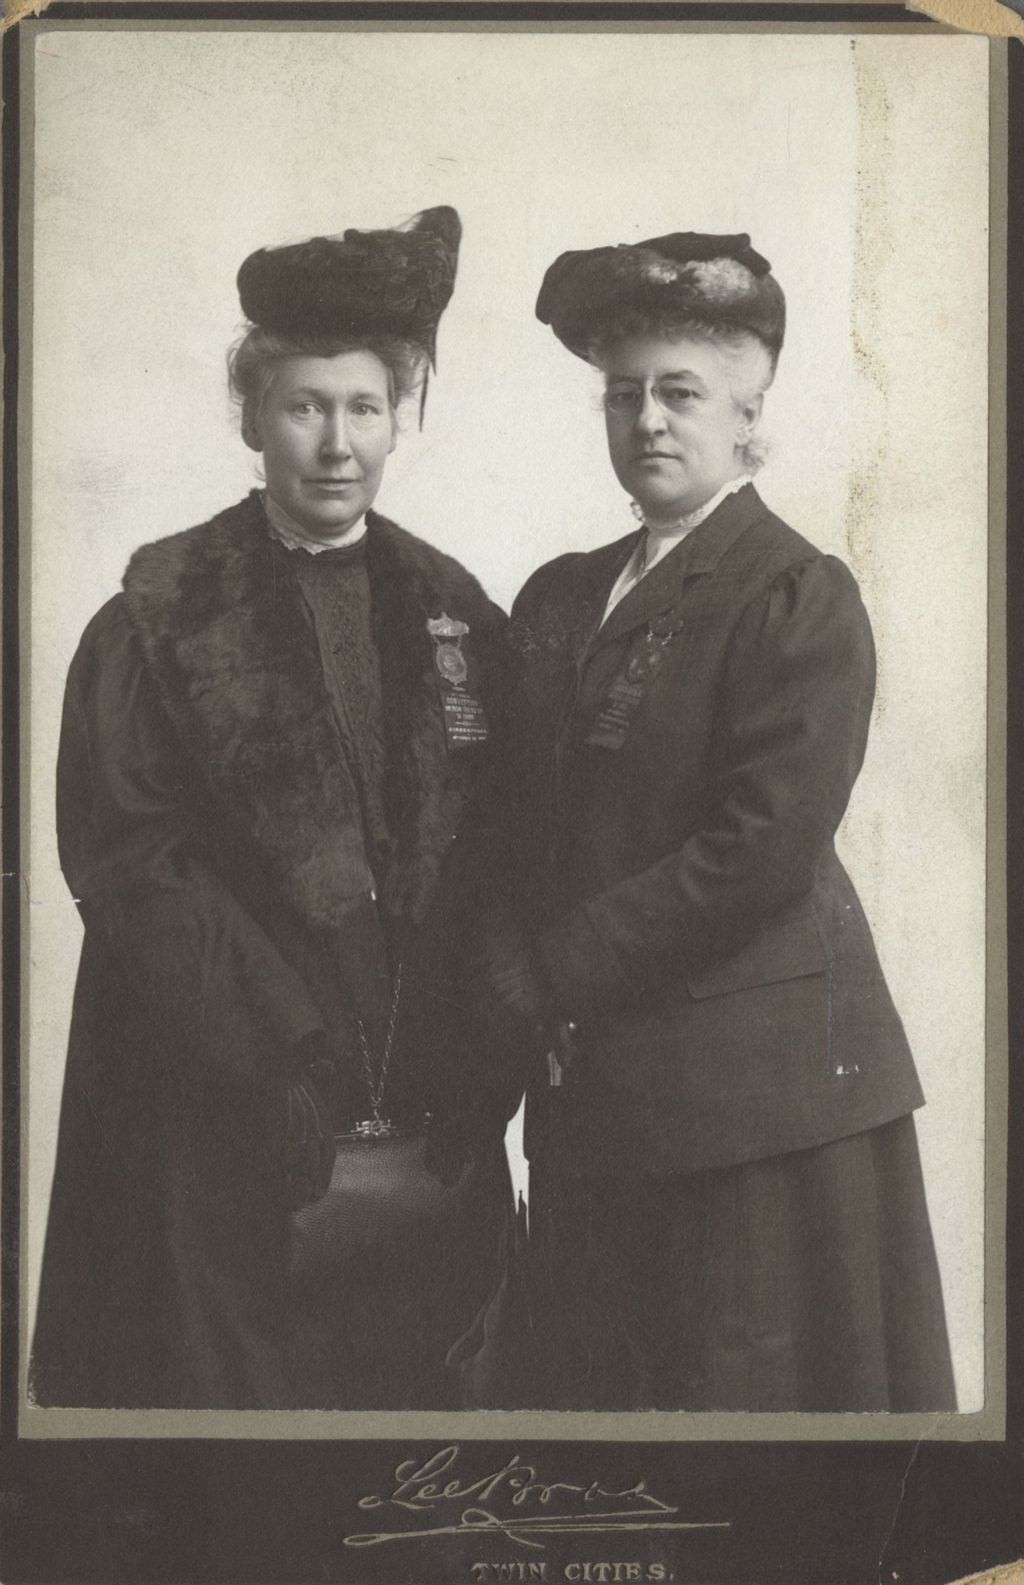 Miniature of Mary Kenney O'Sullivan and Mary McDowell at the 1906 American Federation of Labor convention